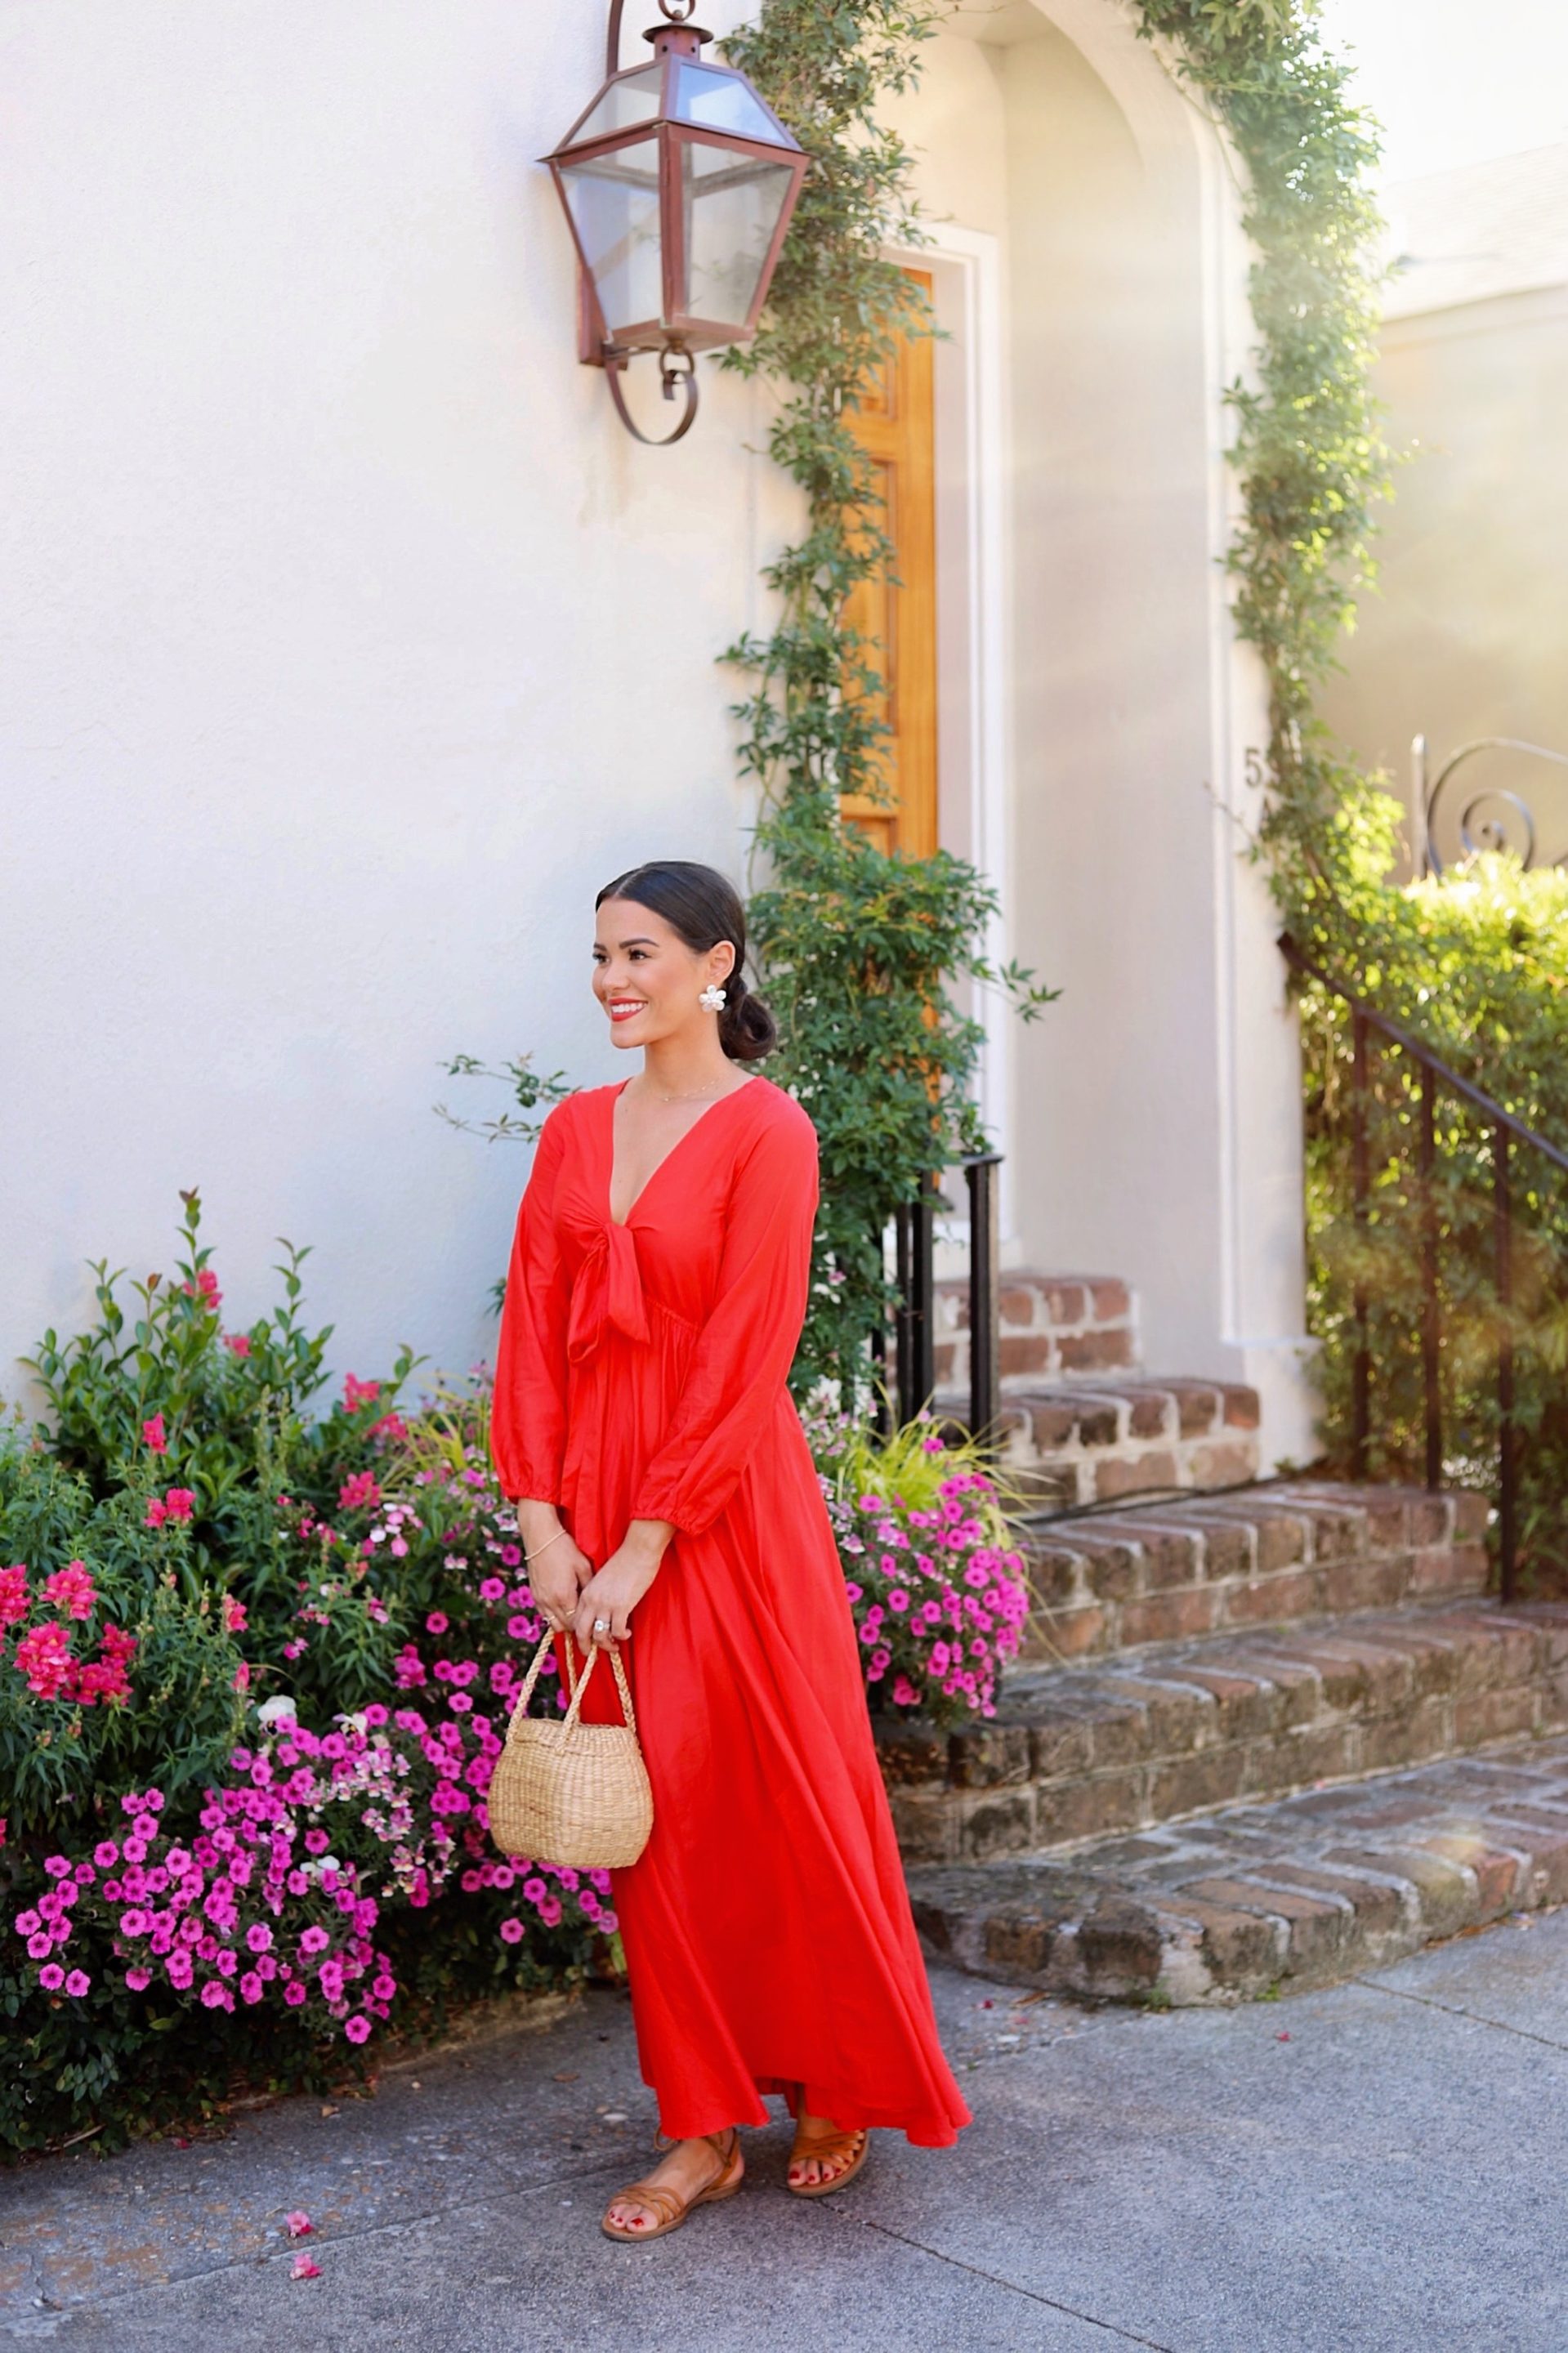 Spring + Summer Wedding Guest Dresses for 2021 - Musings by Madison